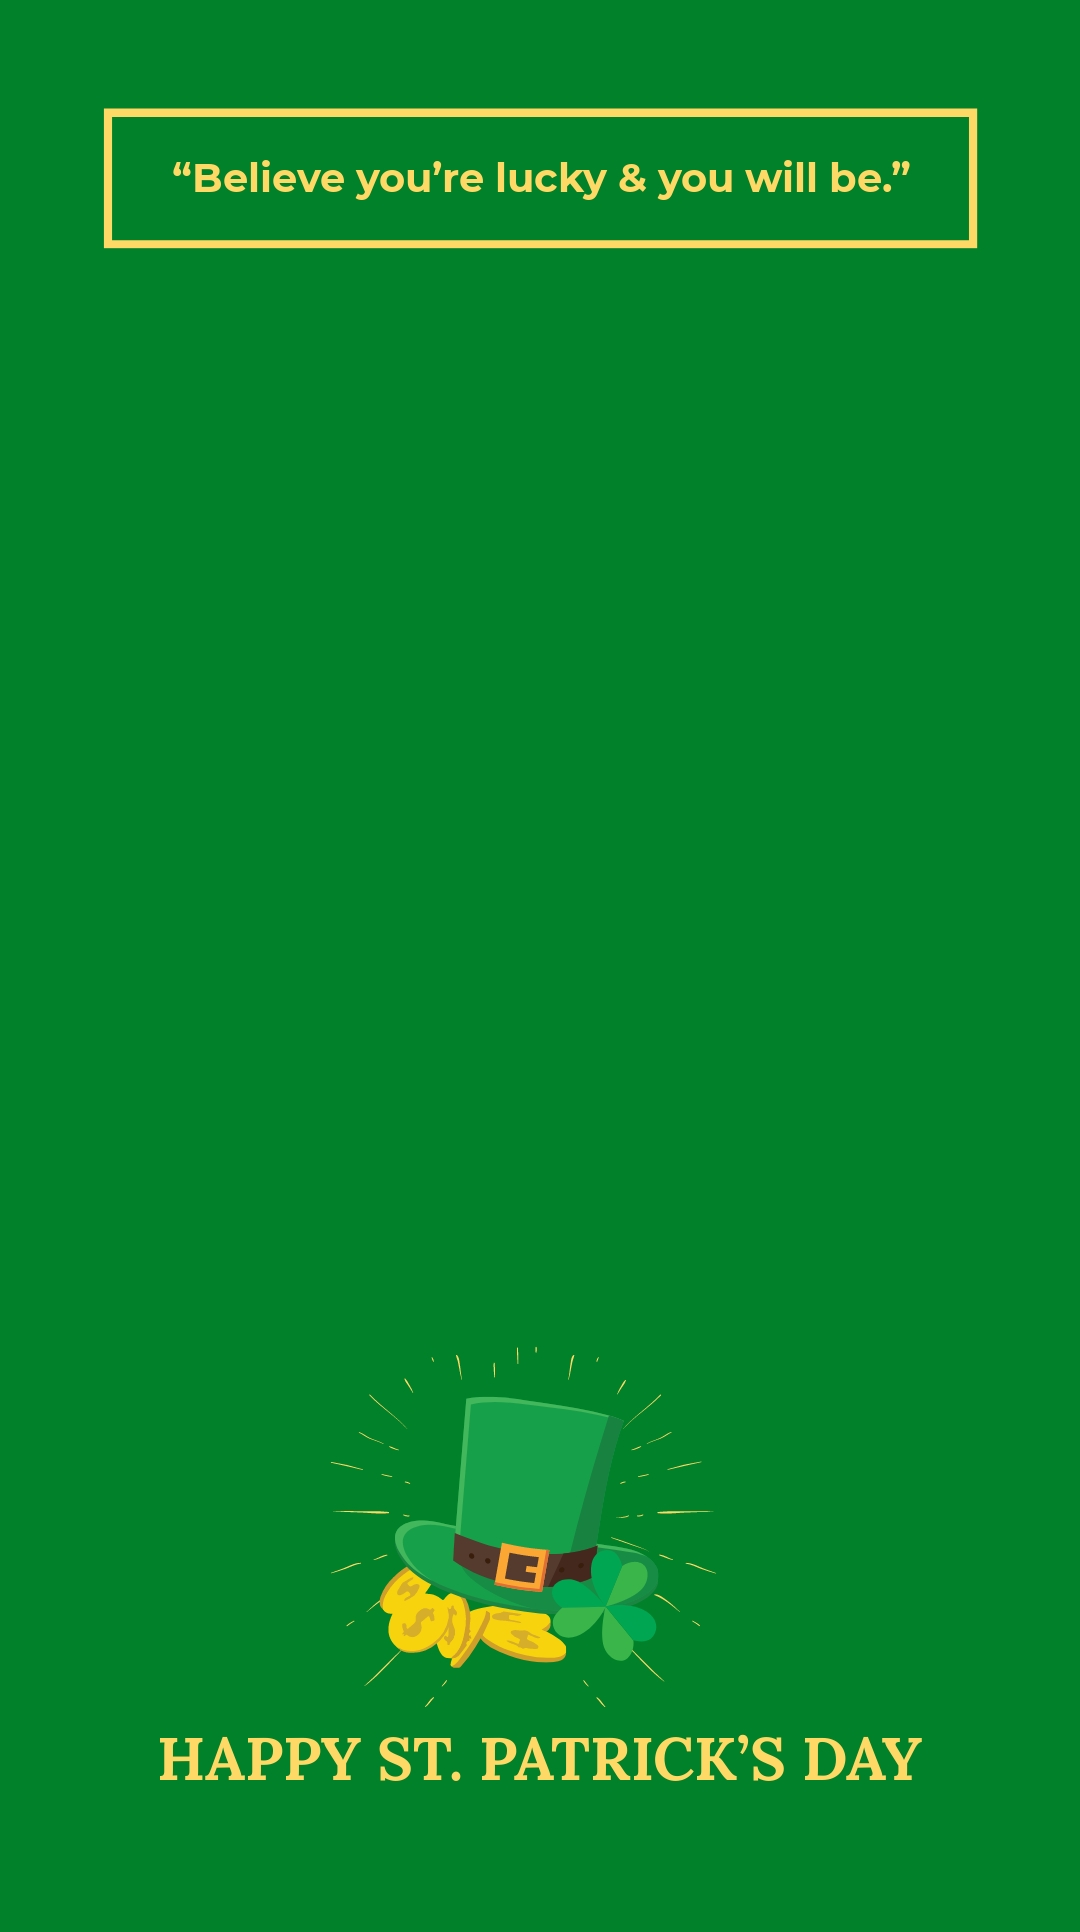 St. Patricks Day Quote Snapchat Geofilter